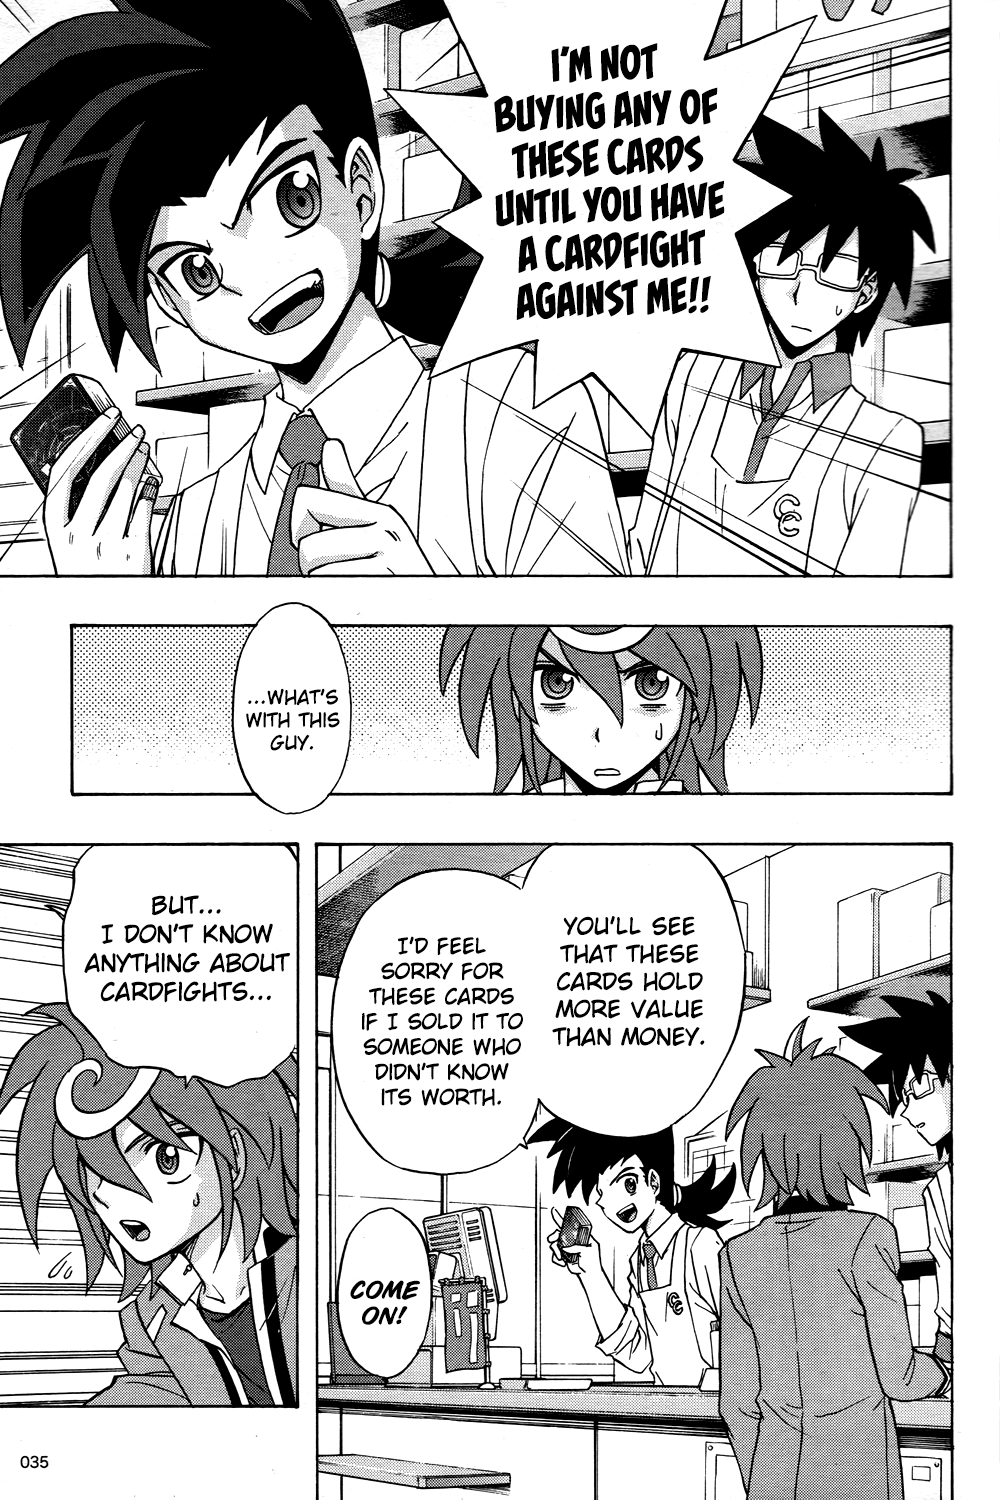 Cardfight!! Vanguard G: The Prologue Vol.1 Chapter 2: For The First Time... - Picture 1